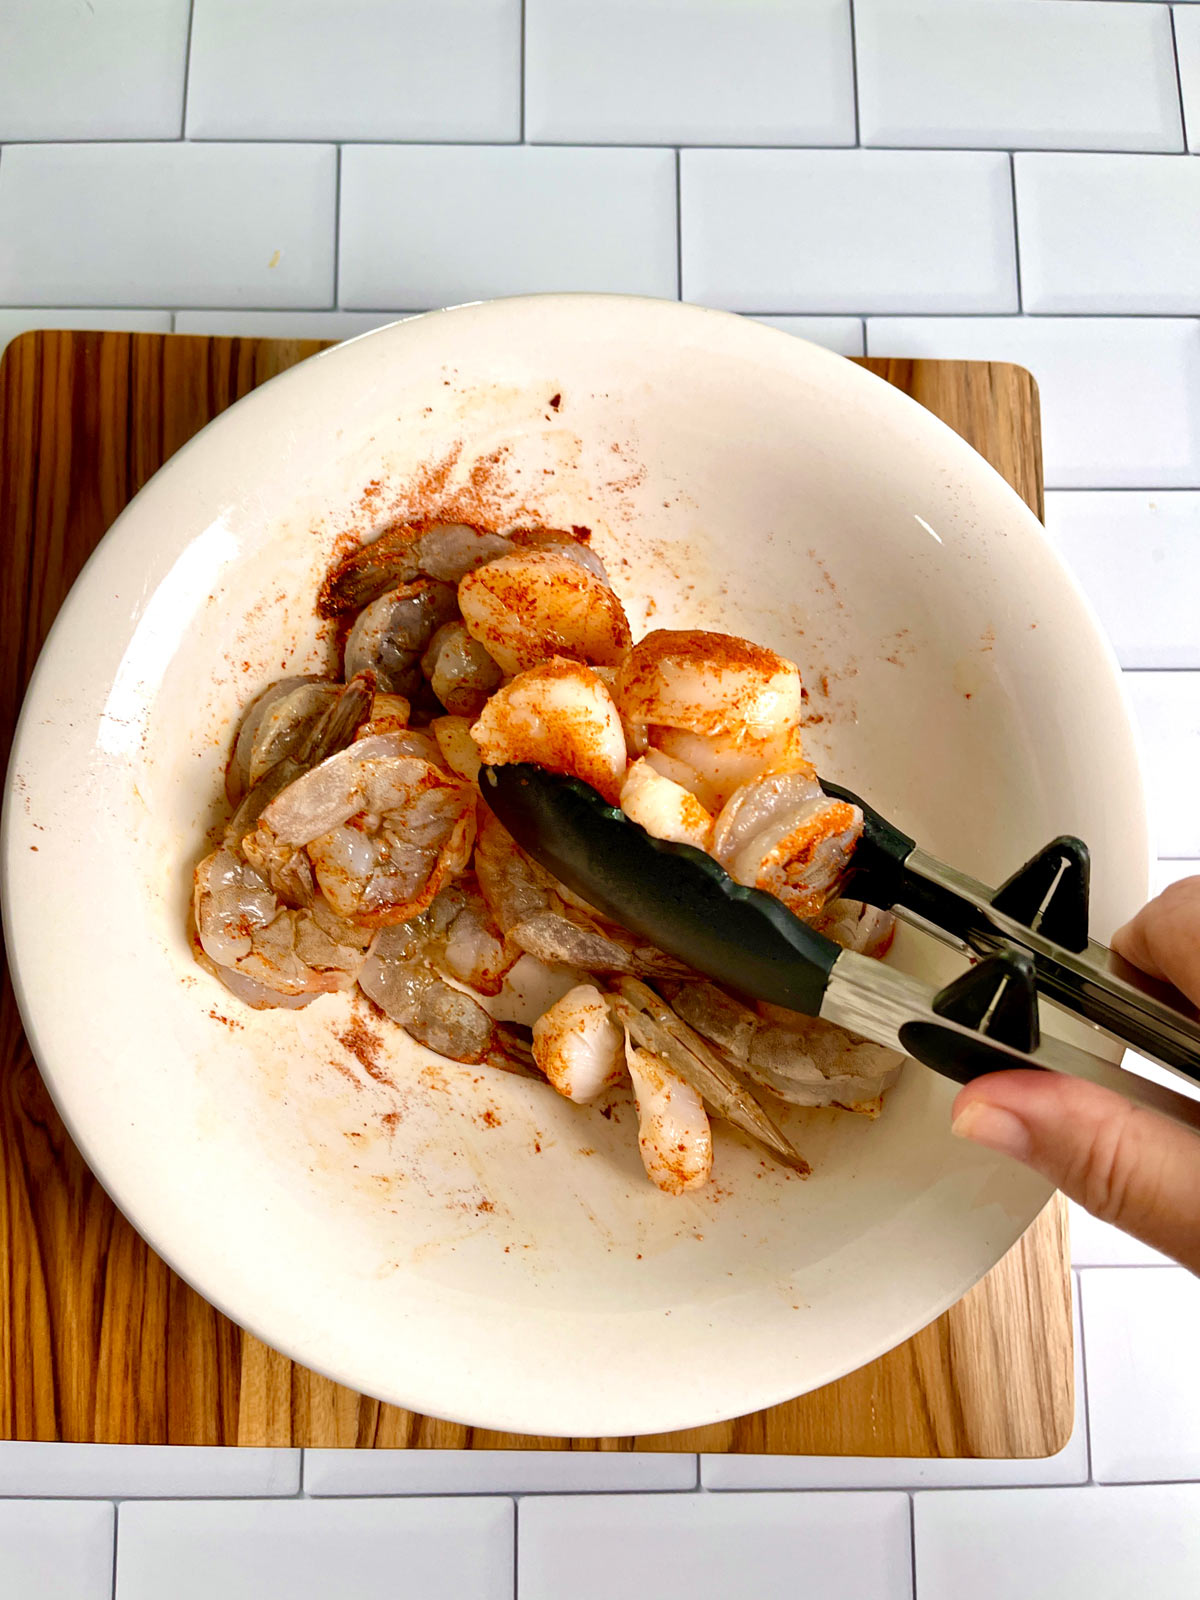 Mixing spices onto shrimp with tongs